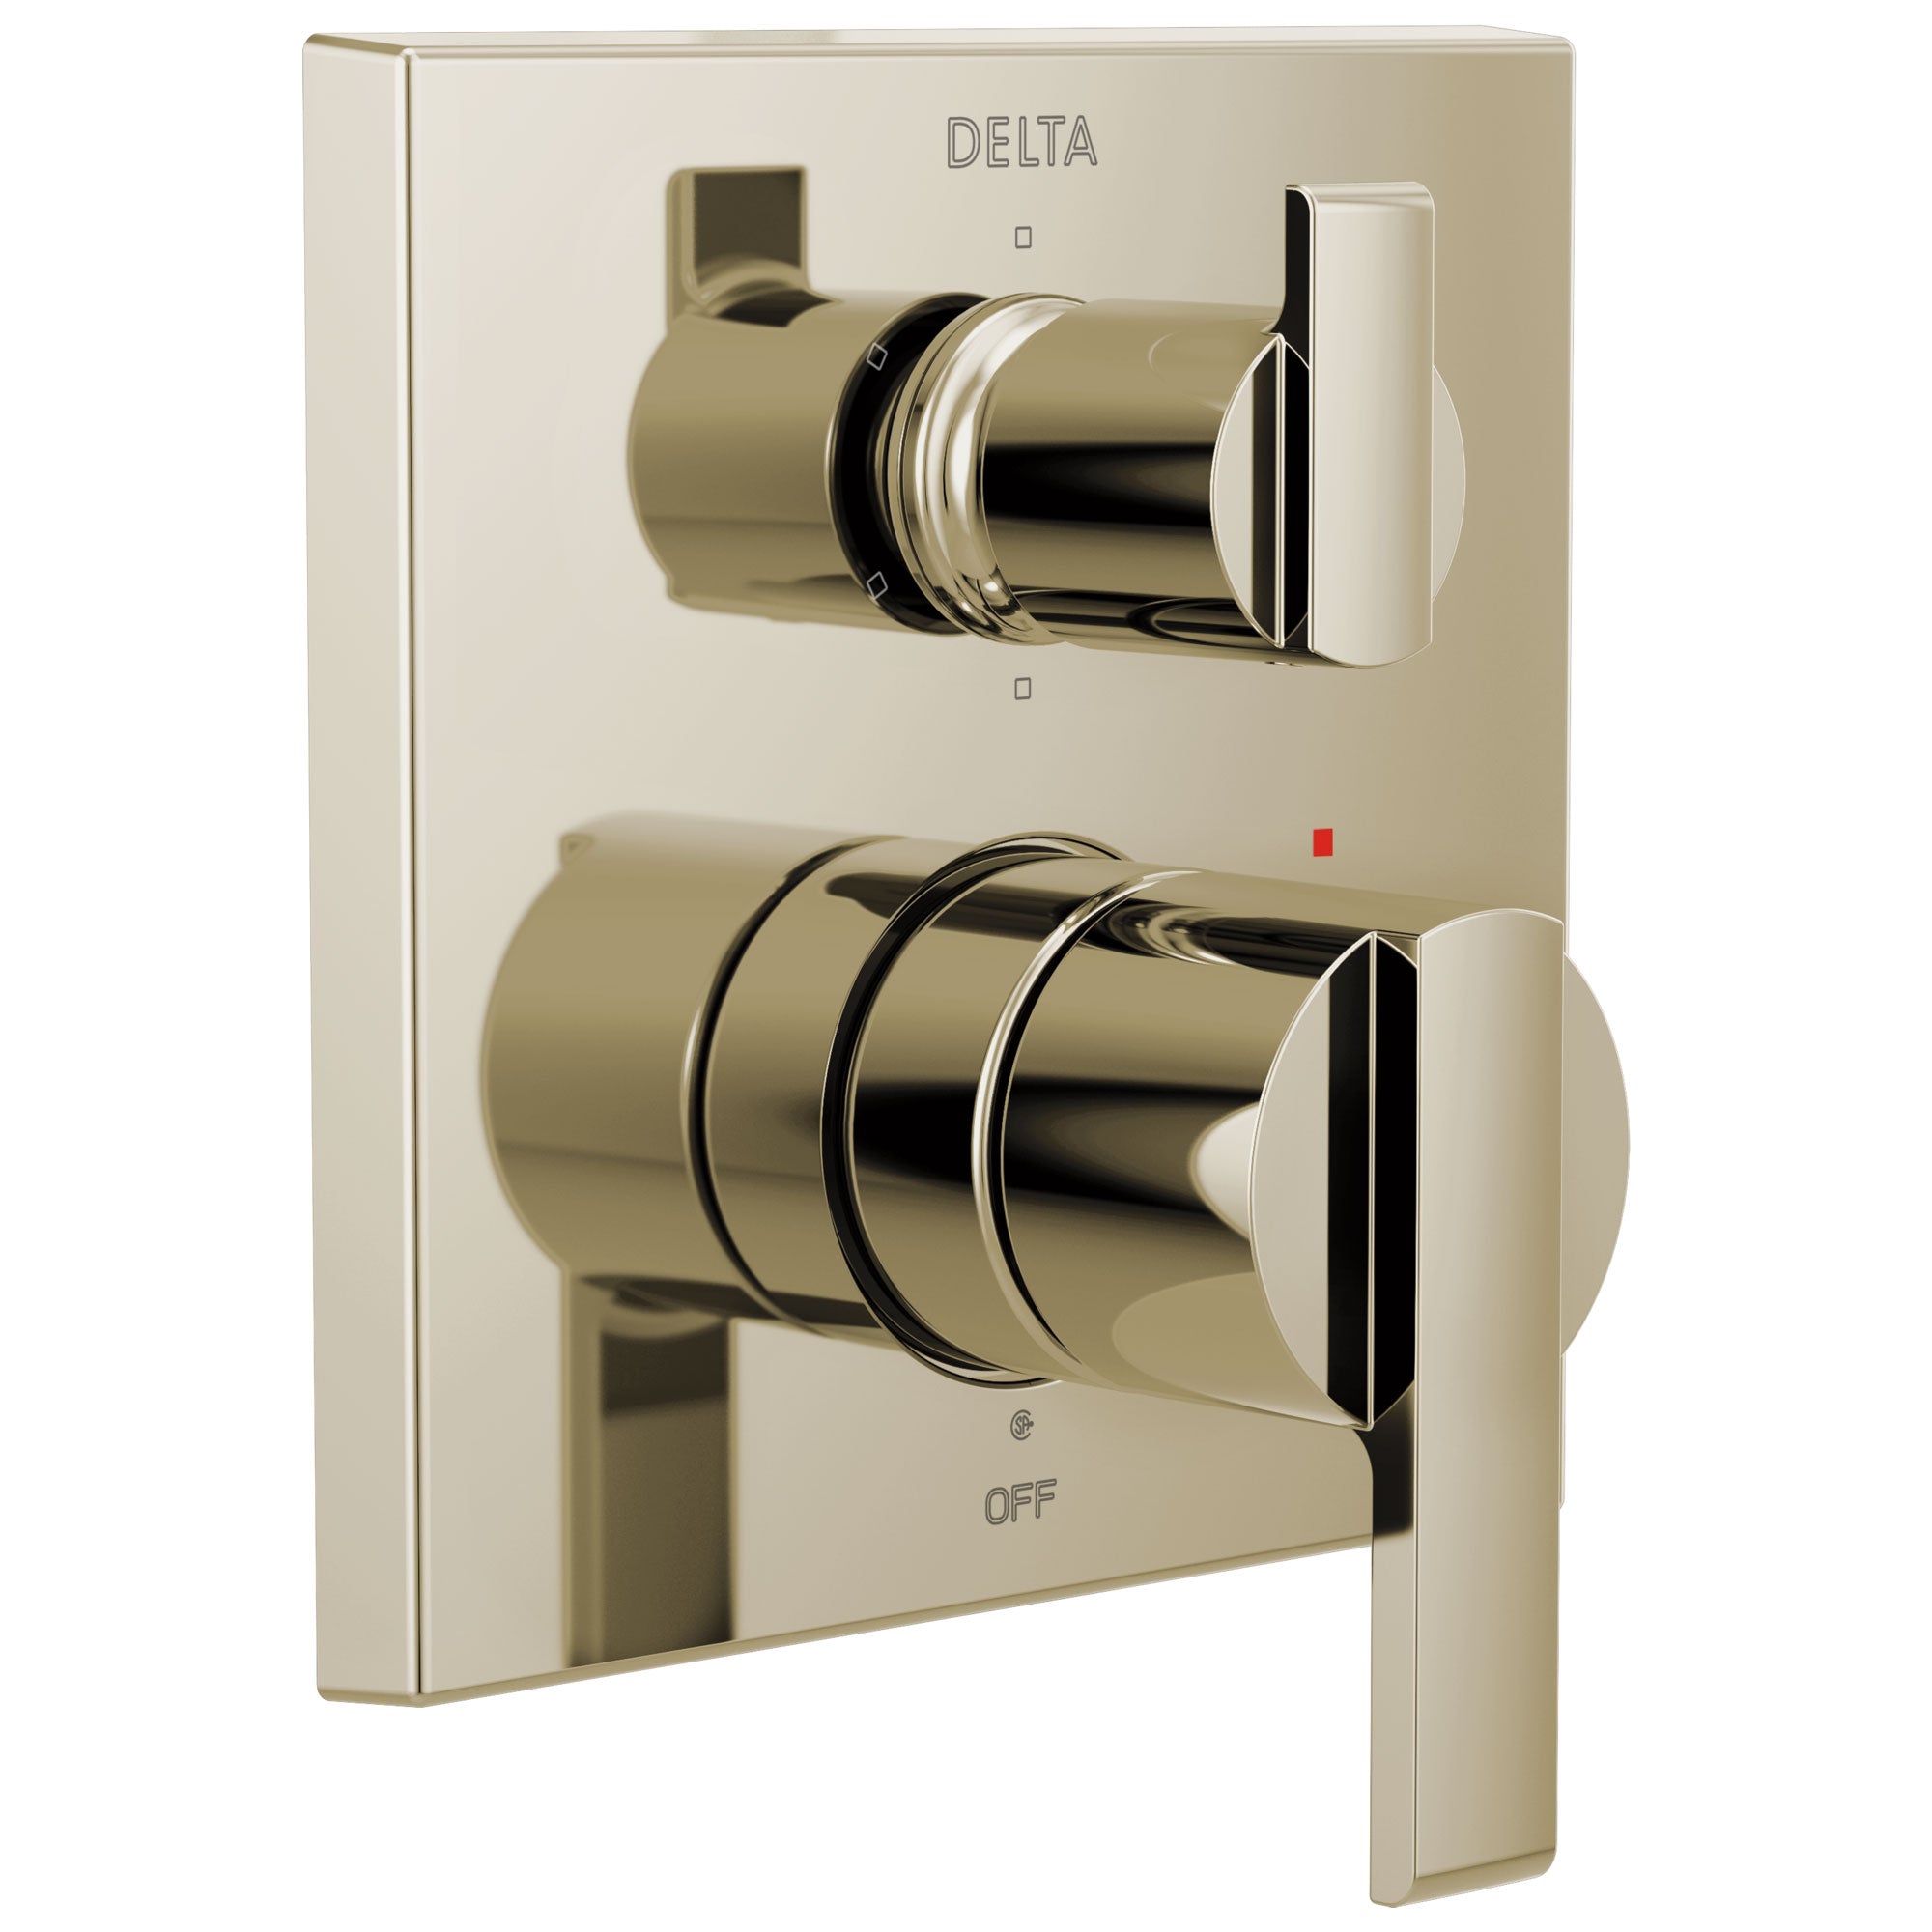 Delta Ara Polished Nickel Finish Angular Modern Monitor 14 Series Shower Control Trim Kit with 6-Setting Integrated Diverter (Requires Valve) DT24967PN